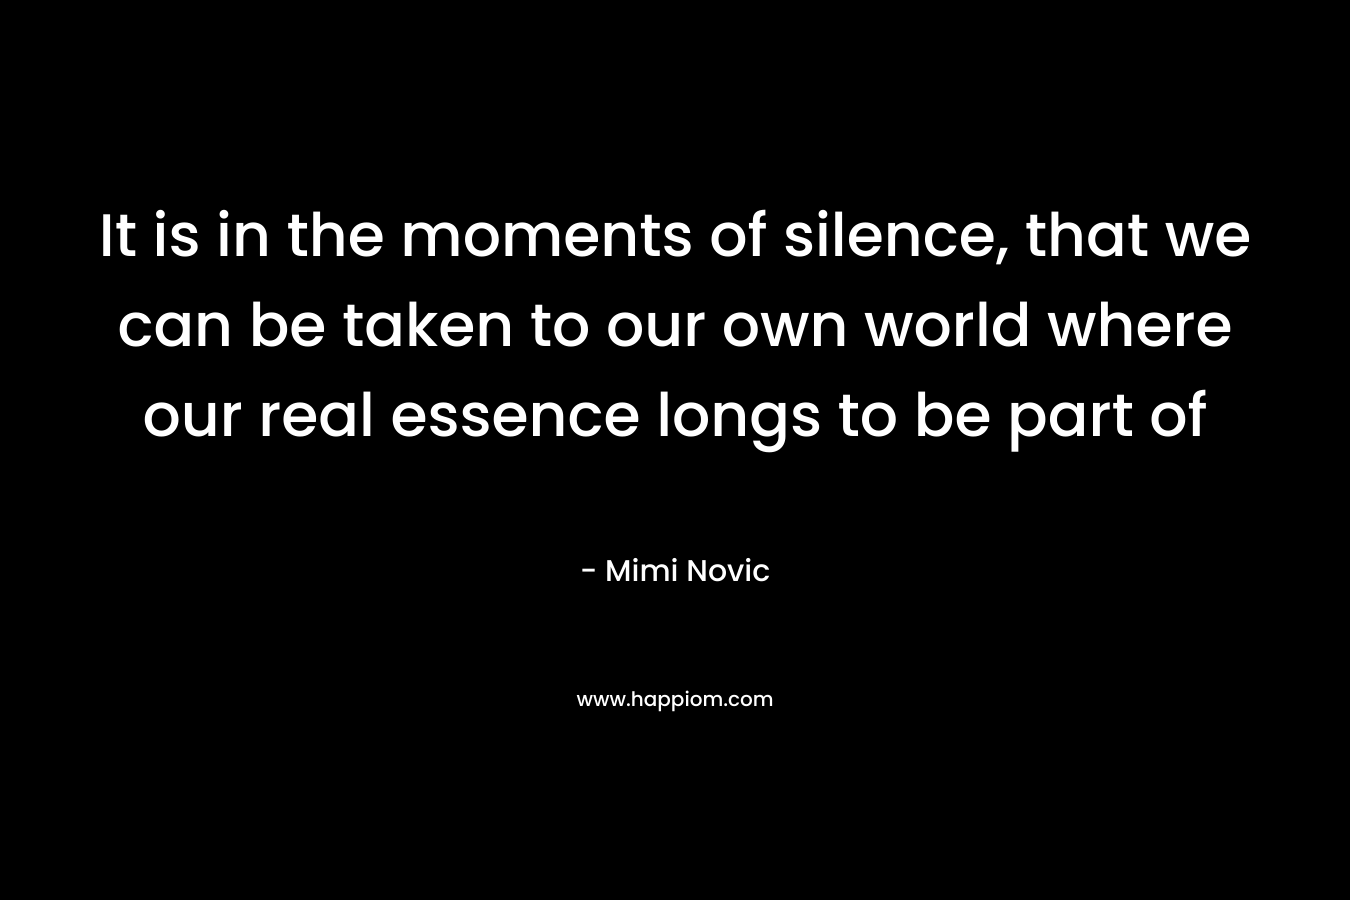 It is in the moments of silence, that we can be taken to our own world where our real essence longs to be part of